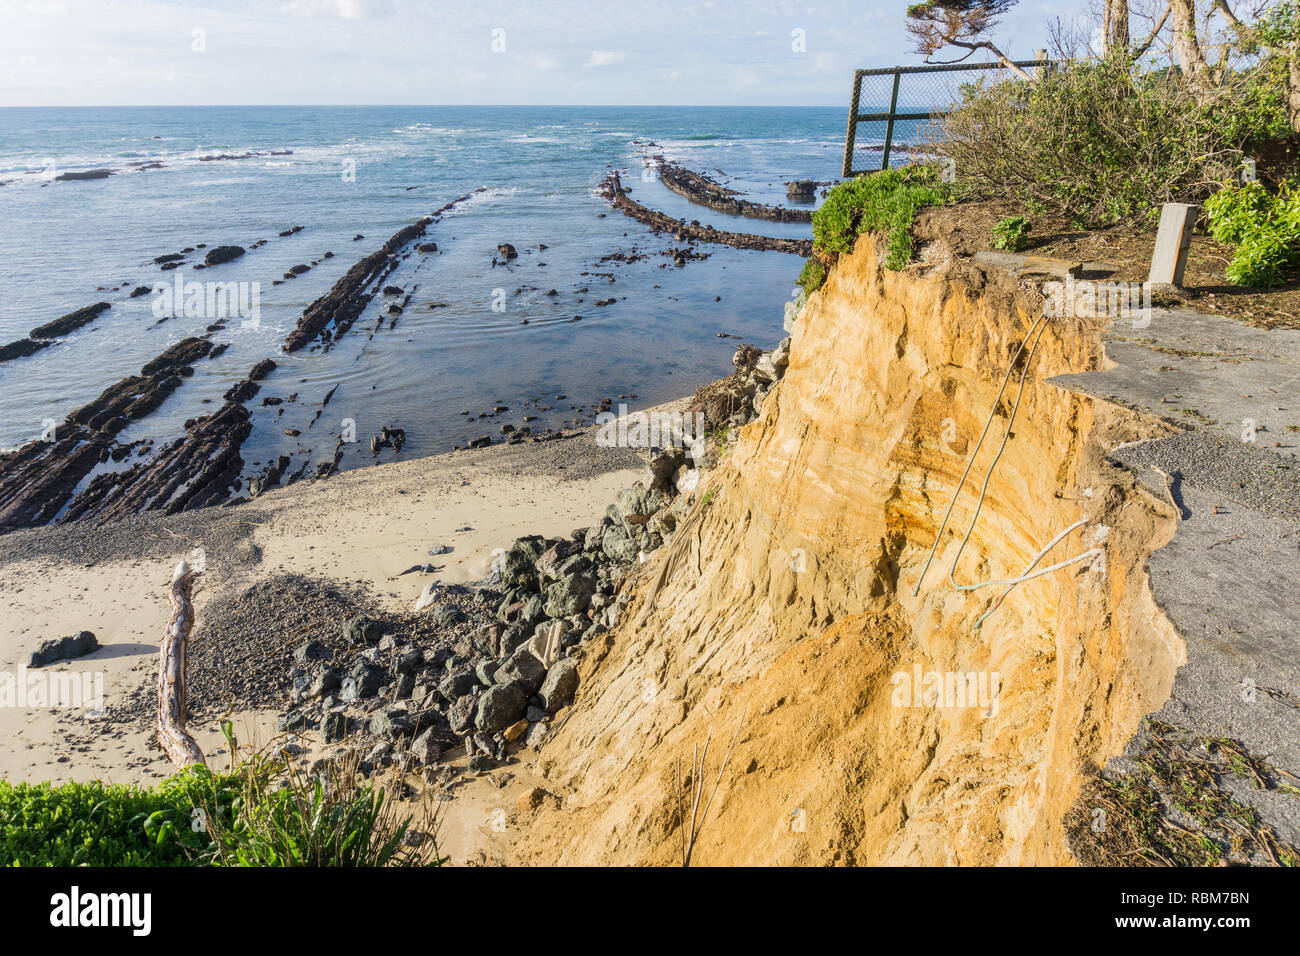 Collapsed paved road due to a landslide on the Pacific Ocean coastline, Moss Beach California Stock Photo